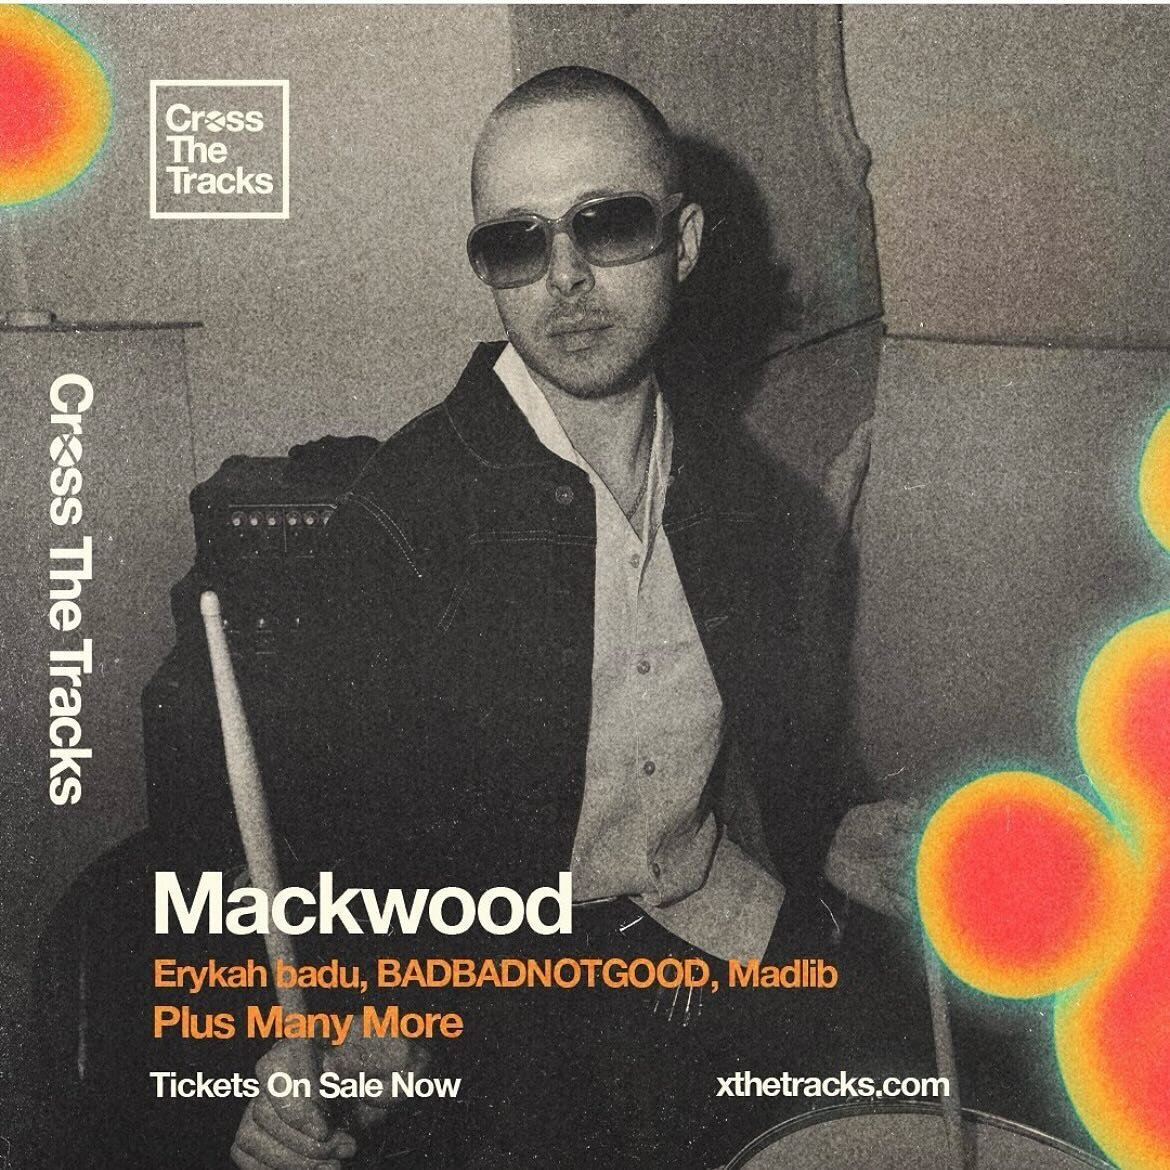 What a lineup - see you there! @mackwood.ling @xthetracks

#mackwood #xthetracks24 #livemusic #livemusiclondon #bringon2024